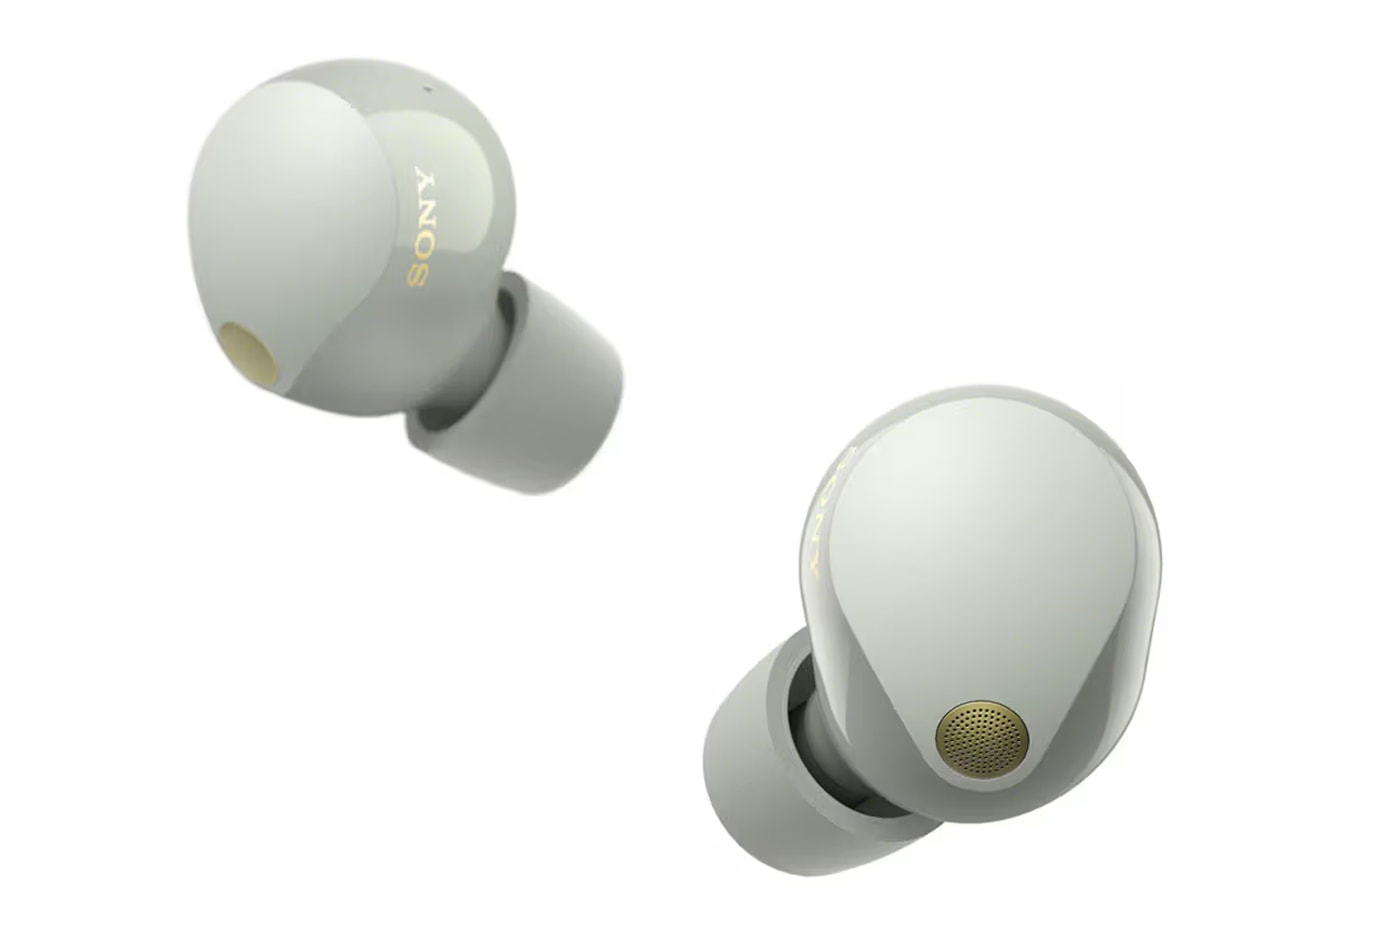 Sony Miguel WF-1000XM5 Wireless Earbuds Headphones Pre Order online cost price photos preview release date